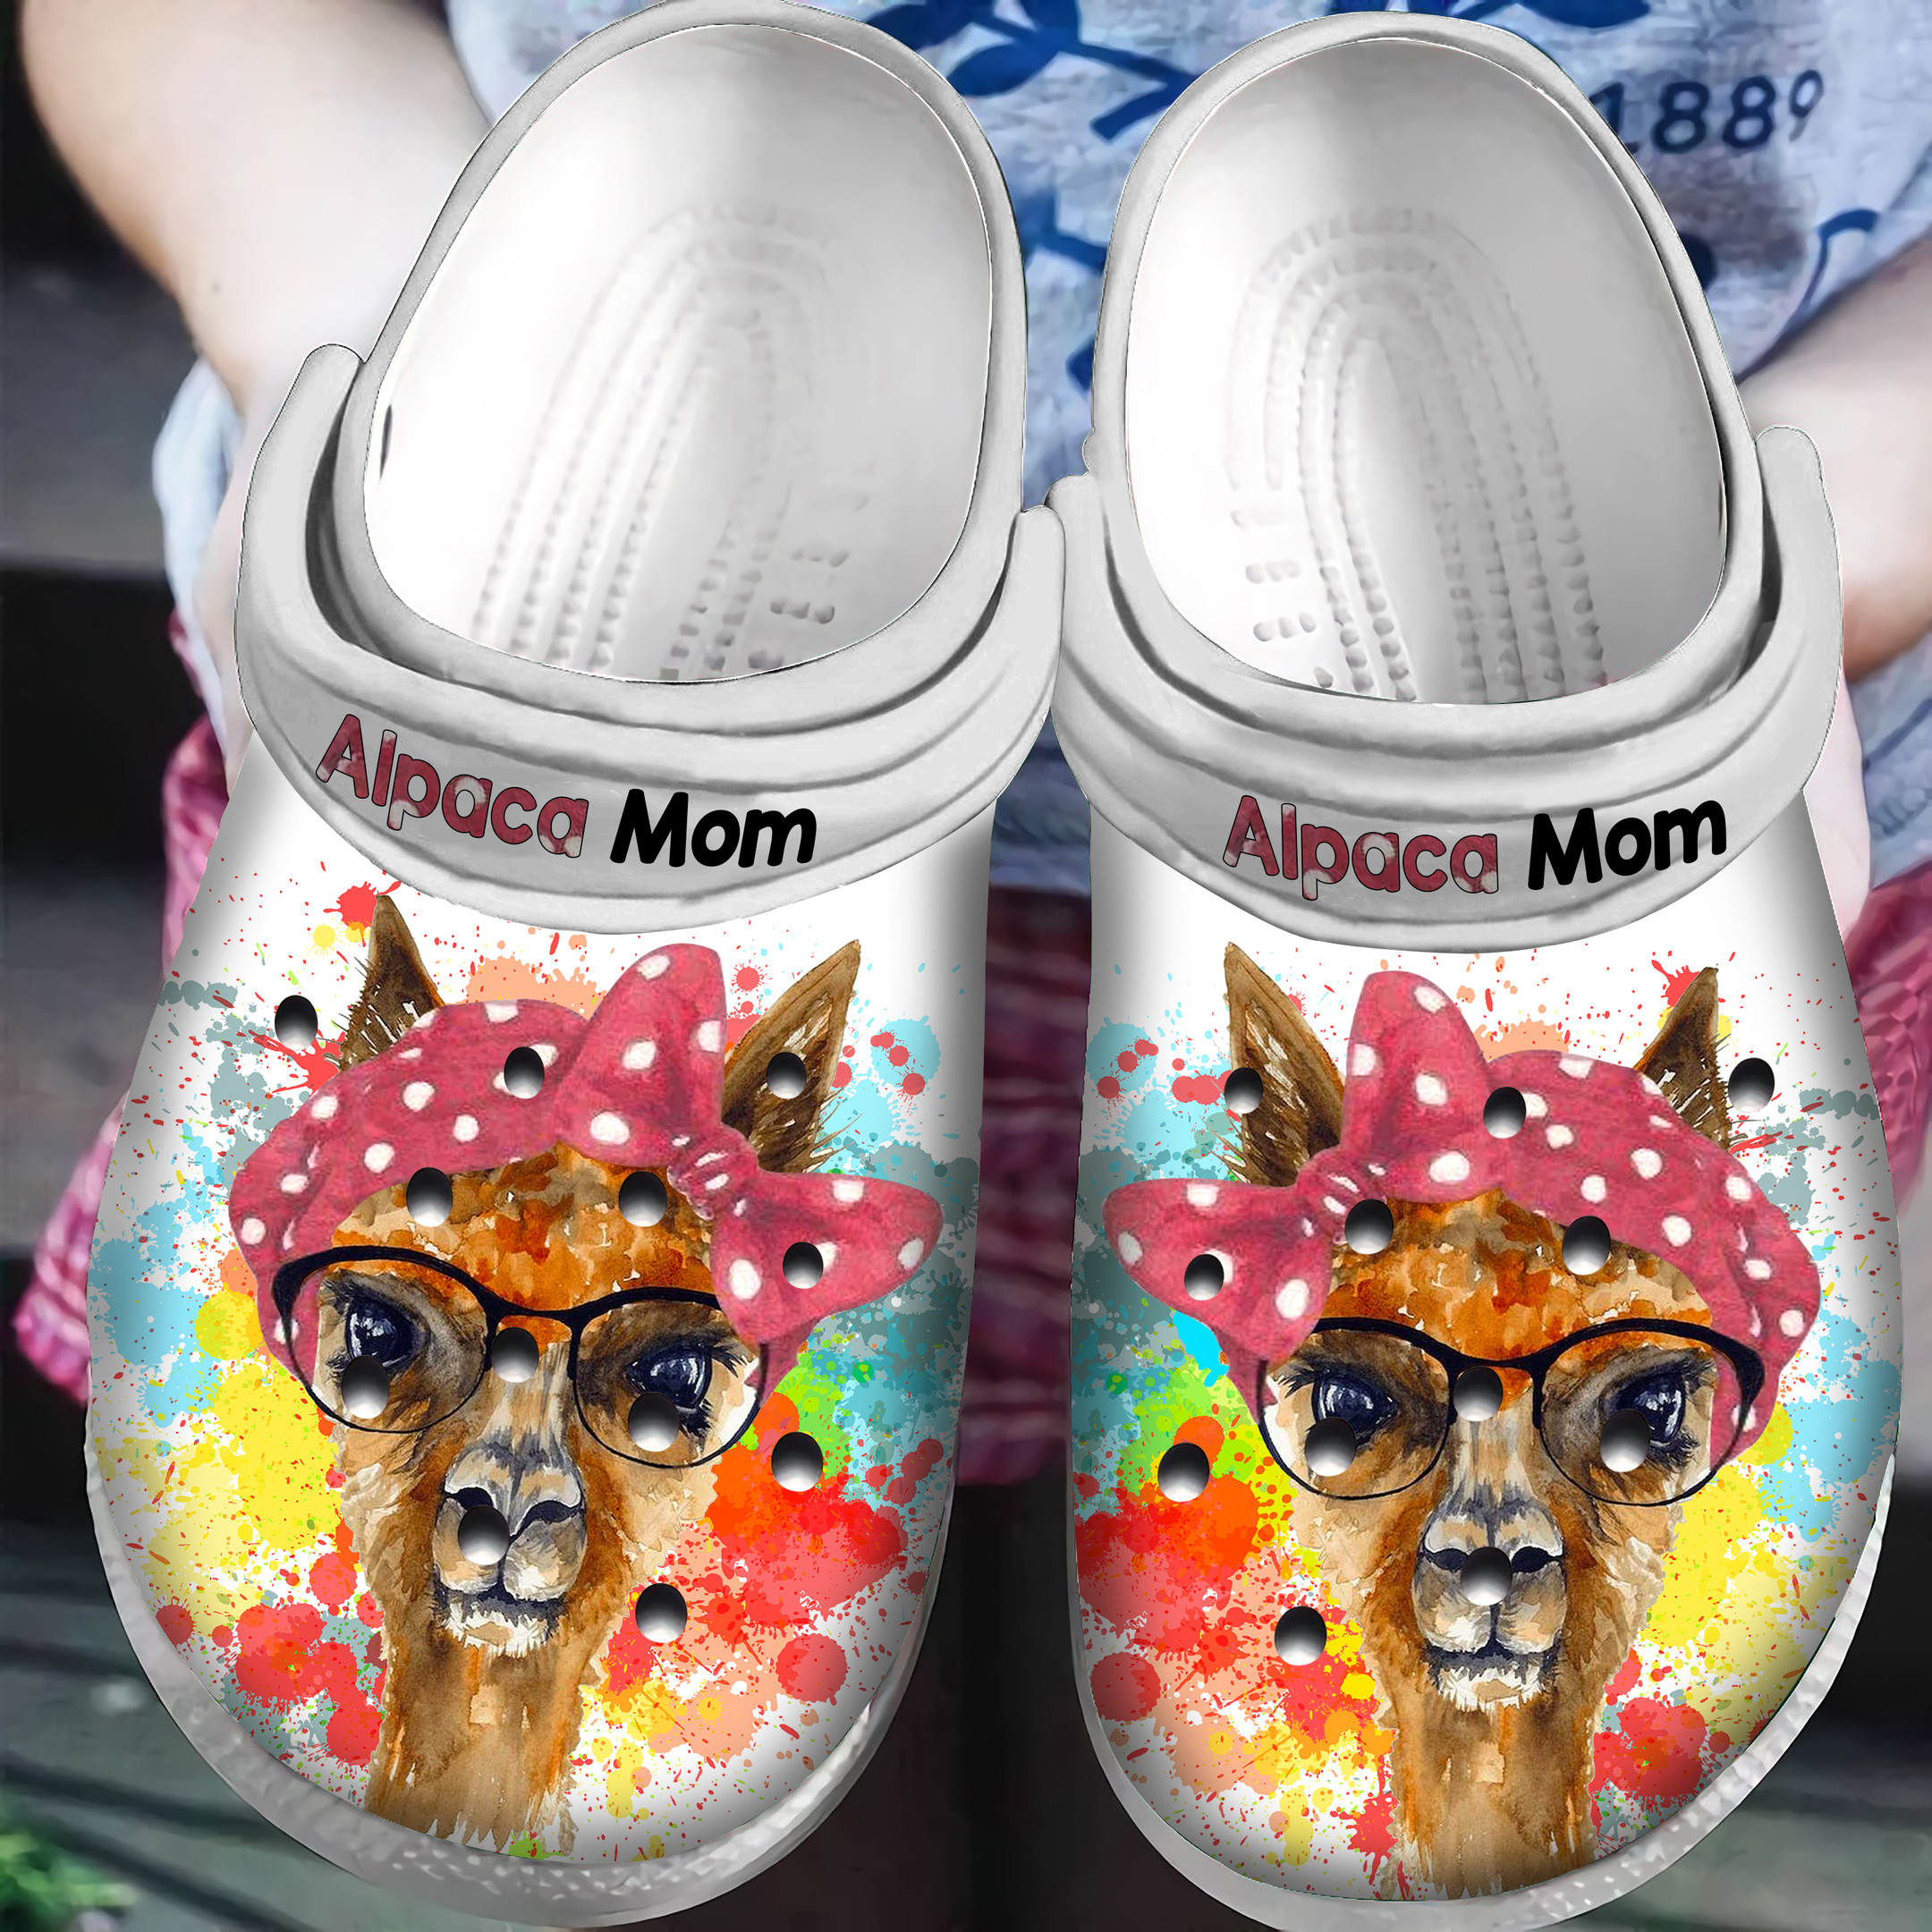 Alpaca Mom Crocs Classic Clogs Shoes Mother's Day Gift